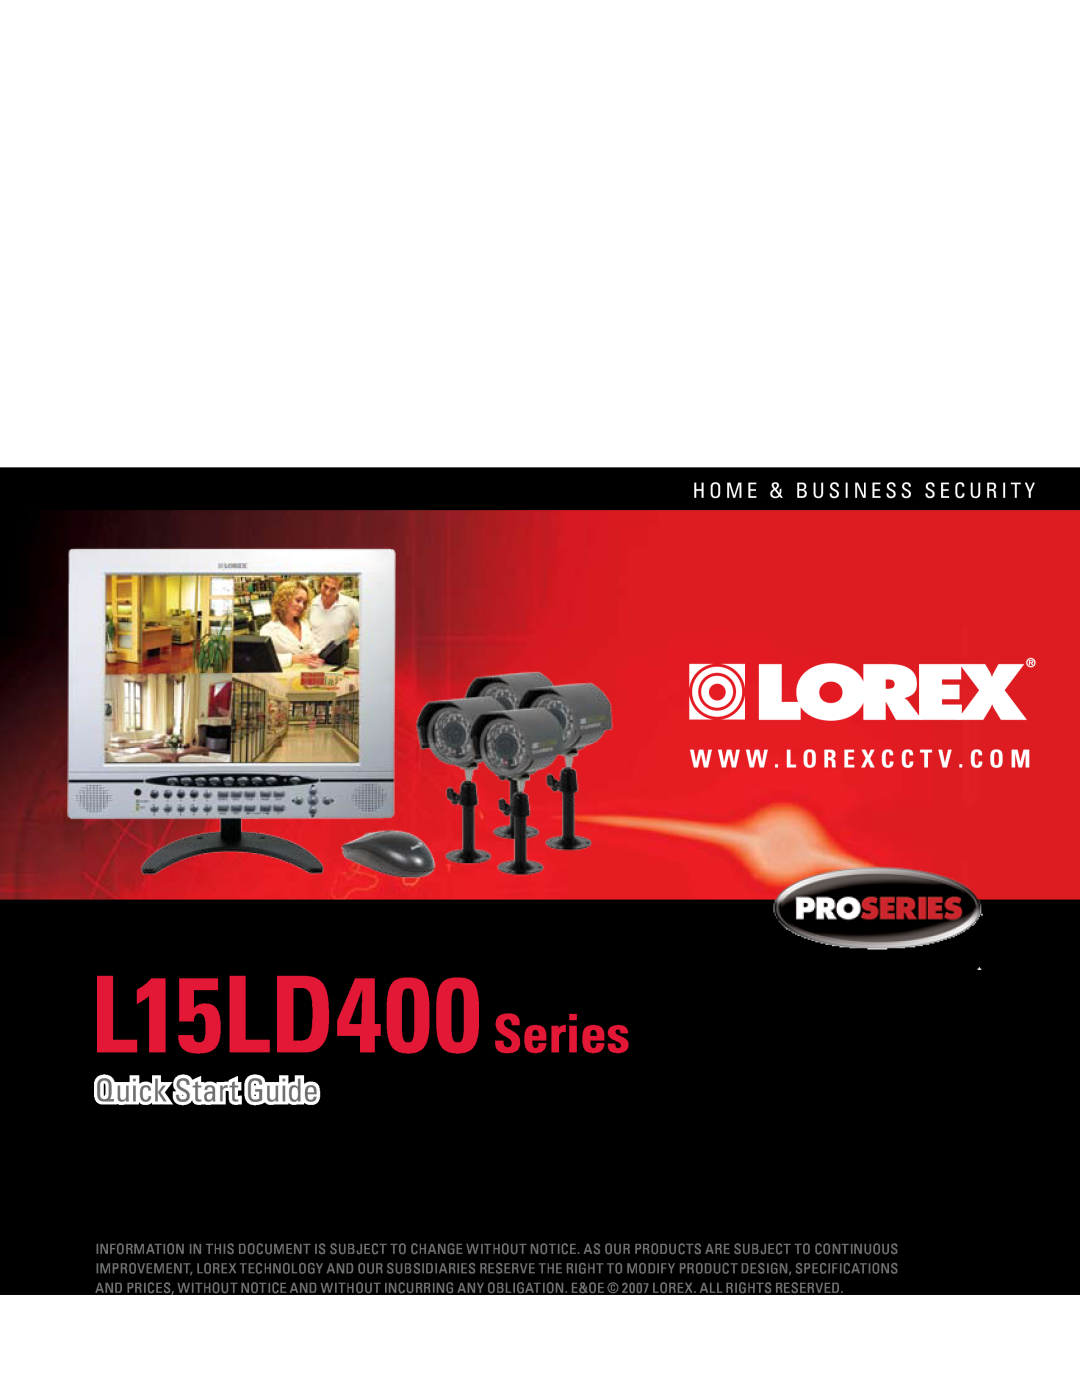 LOREX Technology L15LD400 Series specifications Quick Start Guide, W W W . L O R E X C C T V . C O M 